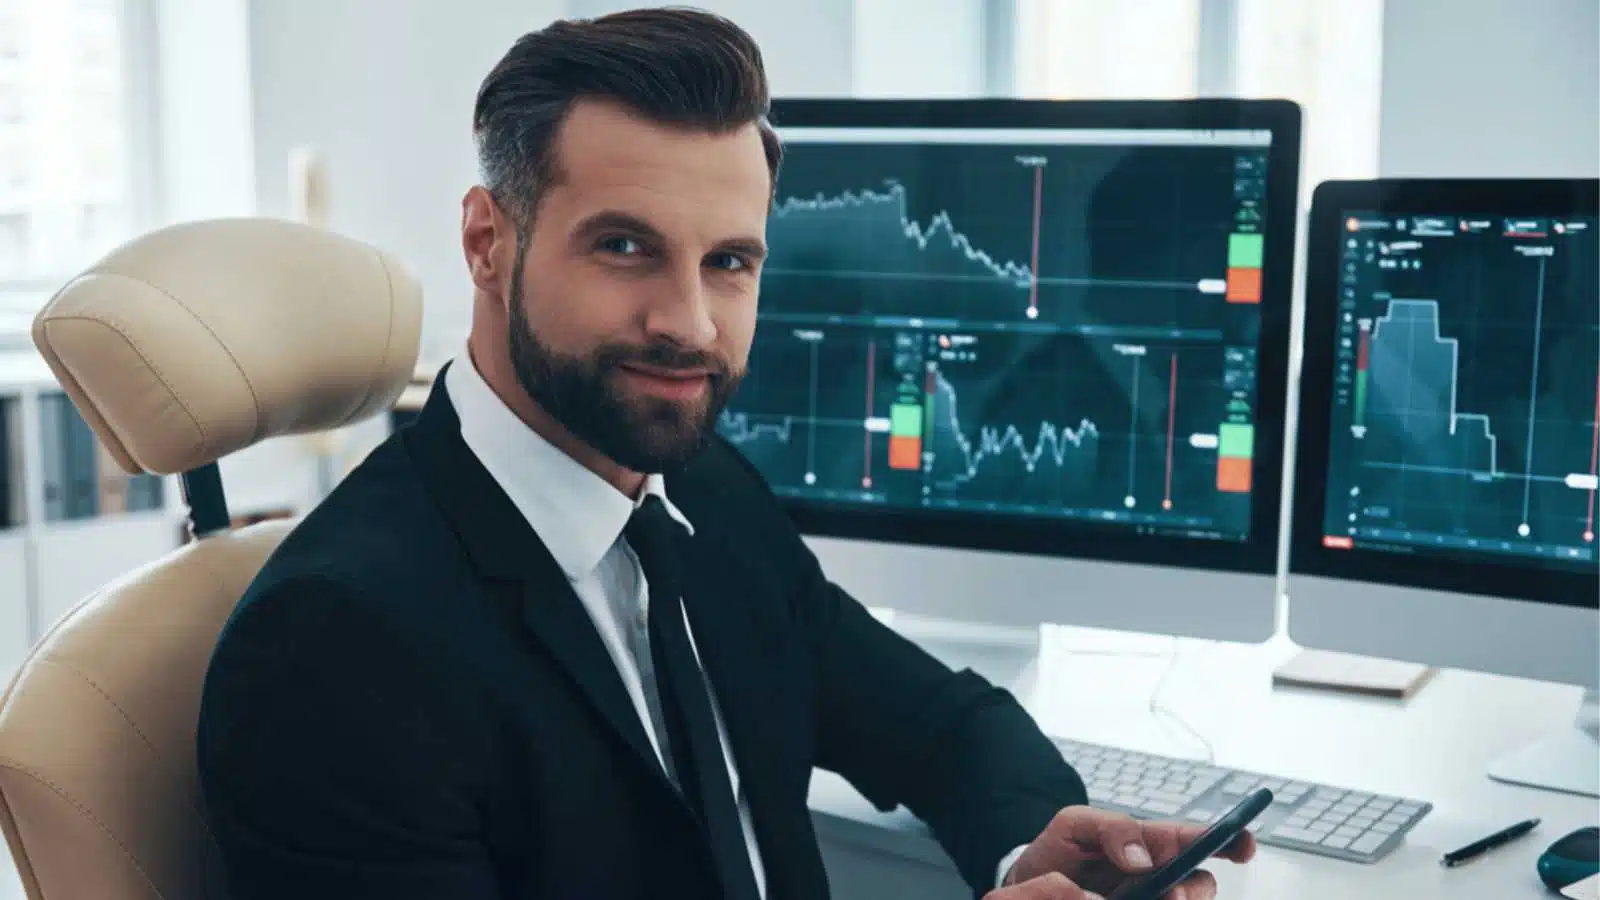 Man invested in stock market